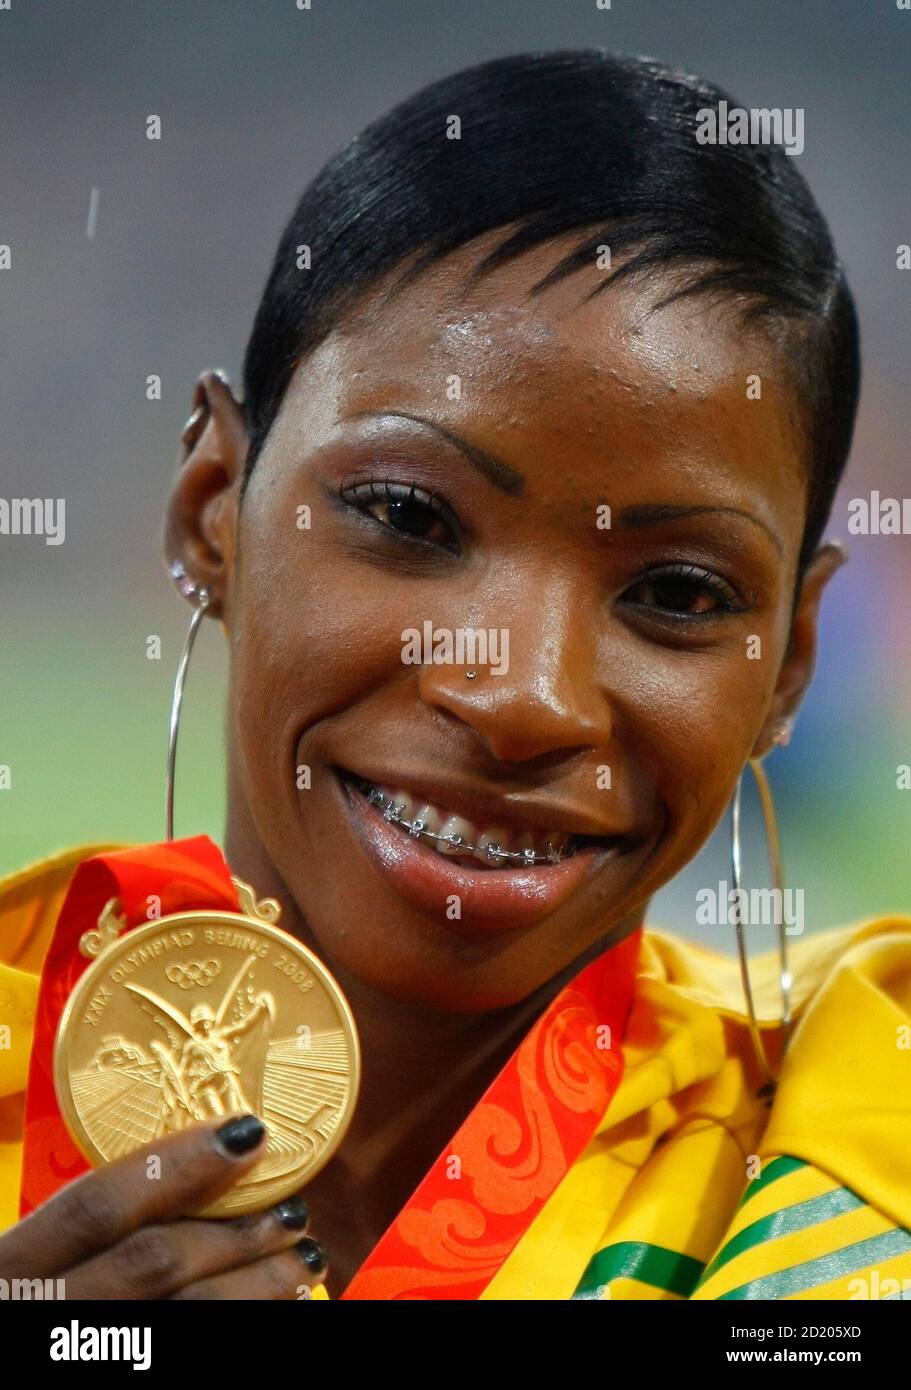 Gold medallist Melaine Walker of Jamaica poses during the medal ceremony for the women's 400m hurdles event of the athletics competition at the Beijing 2008 Olympic Games August 21, 2008.     REUTERS/Mike Blake (CHINA) Stock Photo